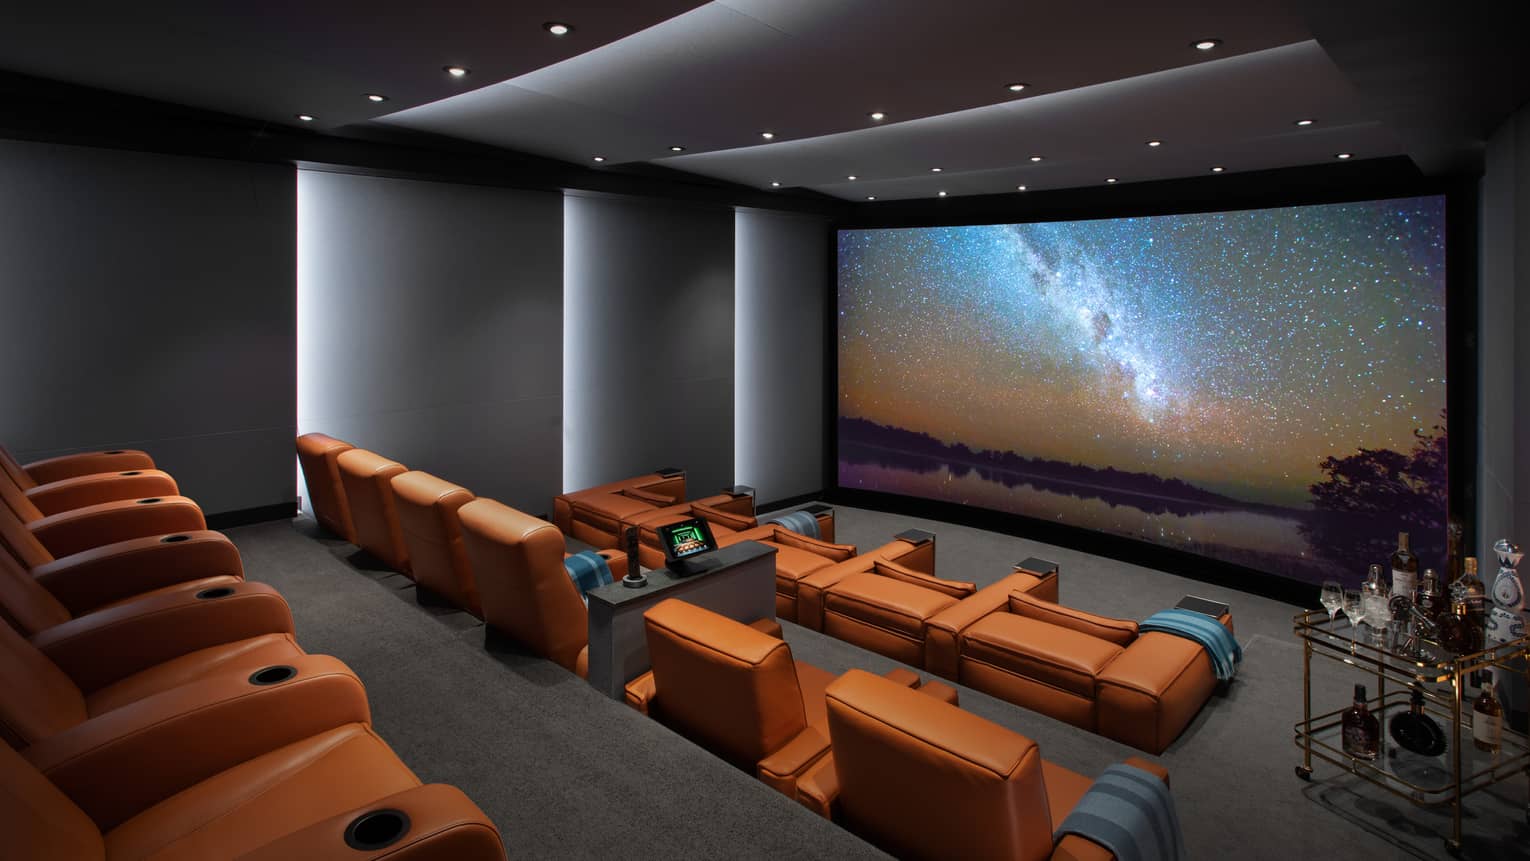 Imax screen and private cinema with theatre seating and bar cart